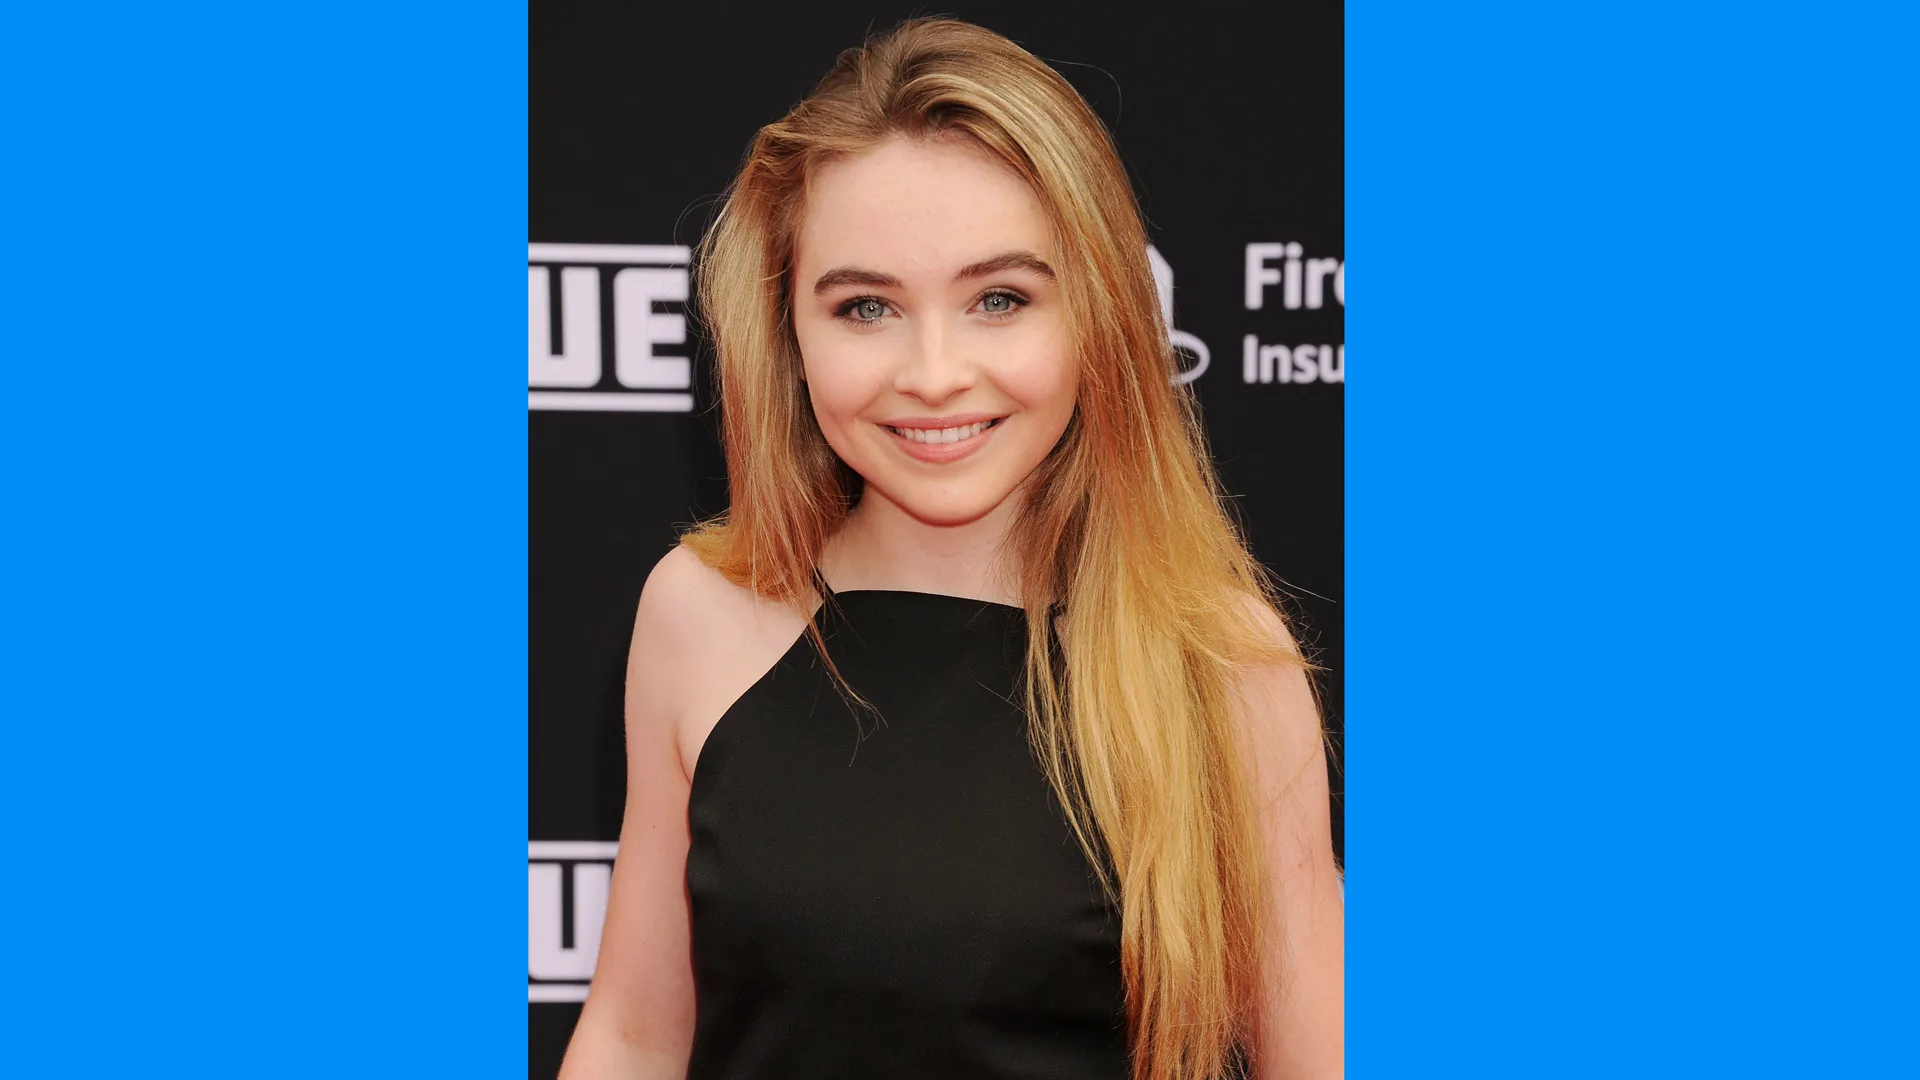 A photo of the singer actress Sabrina Carpenter smiling directly at the camera wearing a black top with blue borders either side